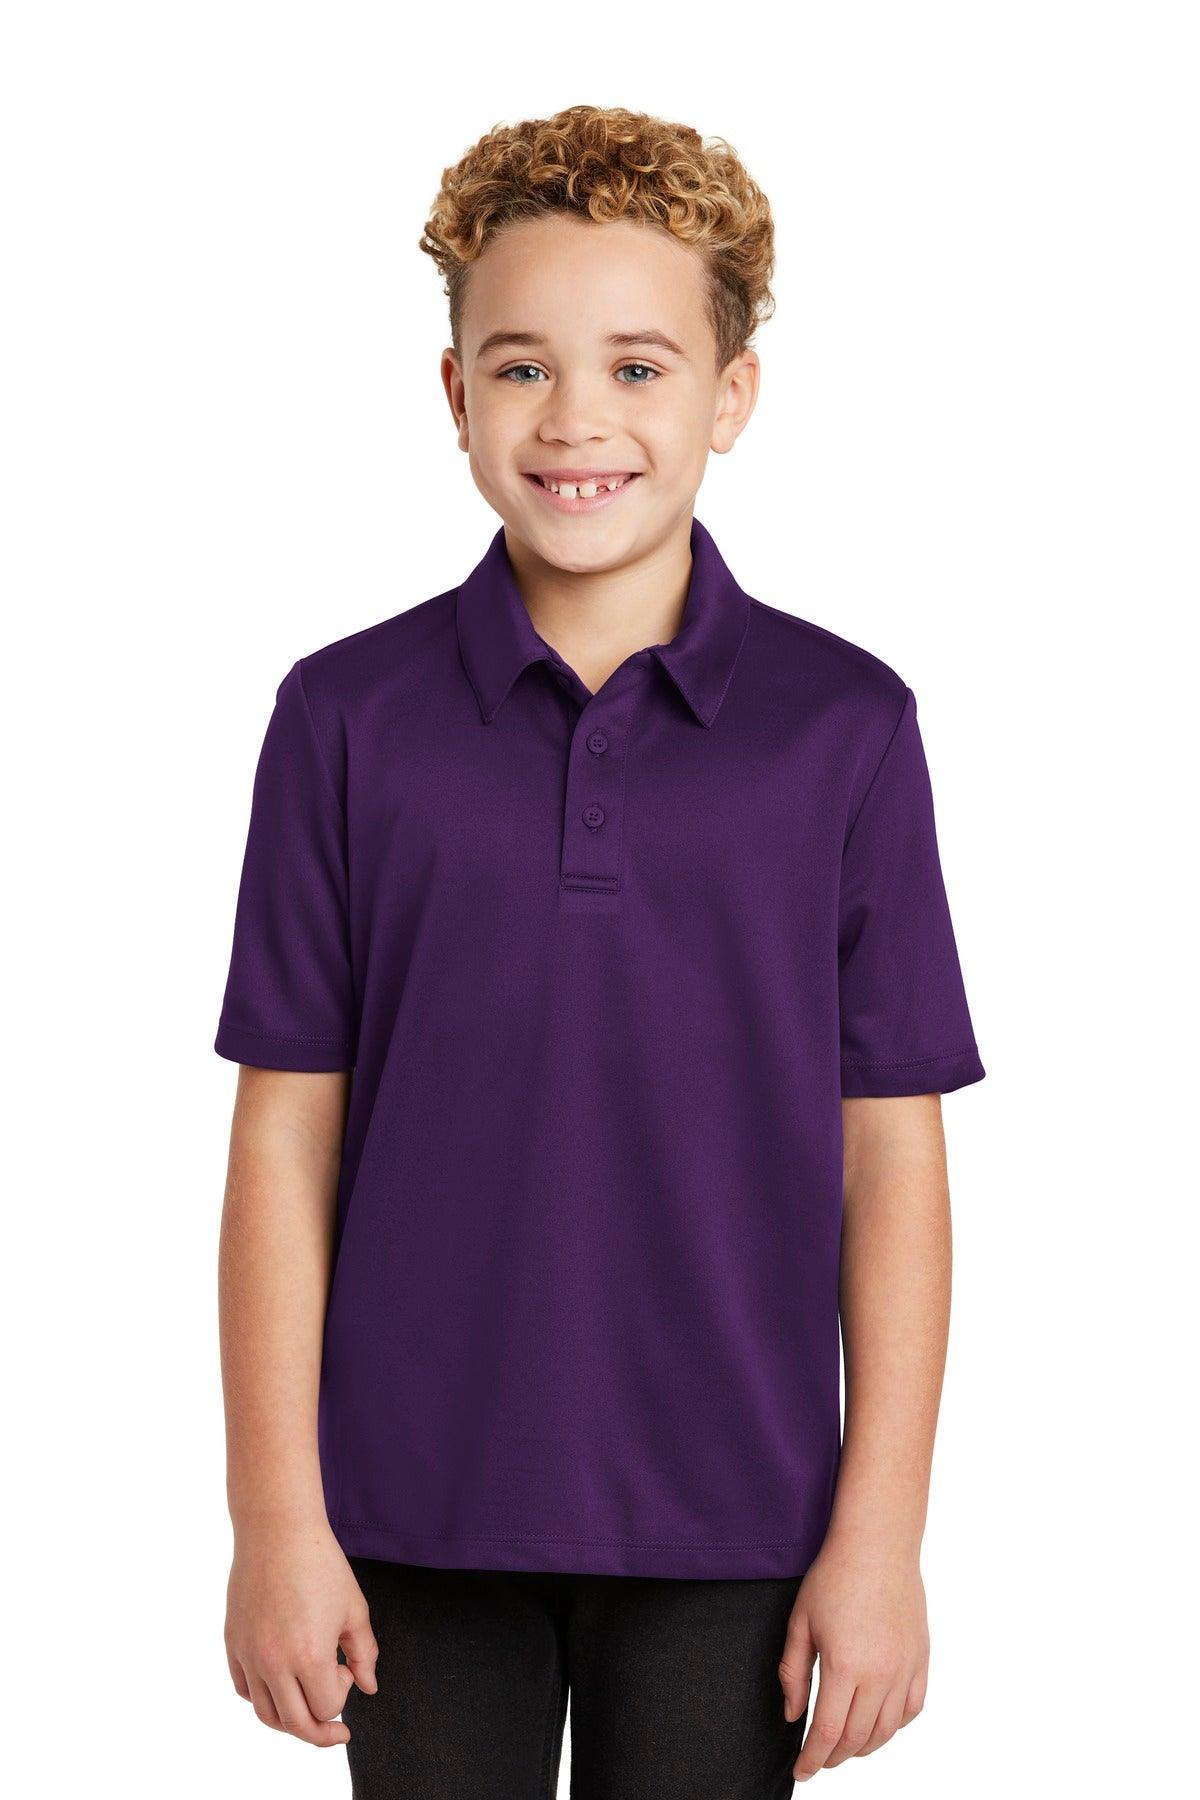 Port Authority Youth Silk Touch Performance Polo. Y540 - Dresses Max